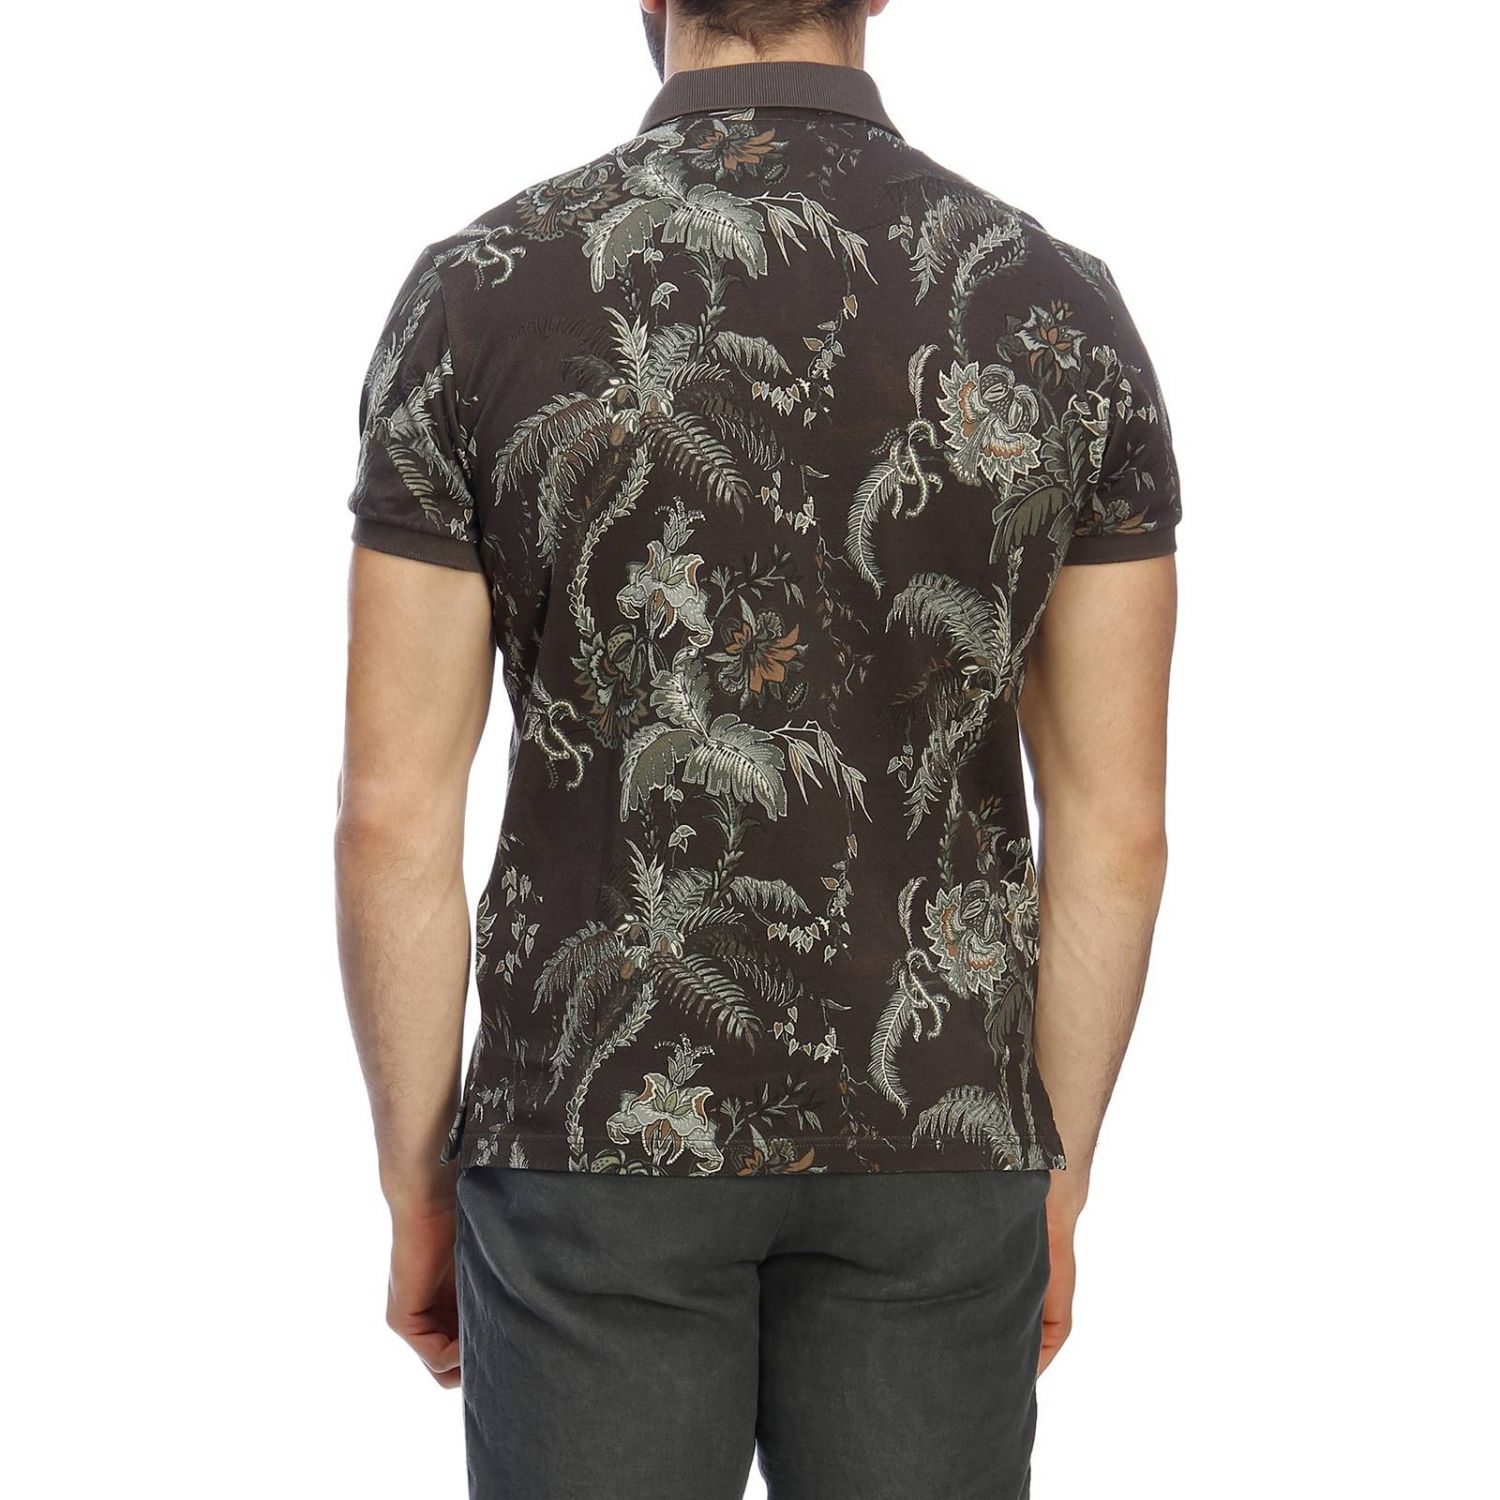 Etro Outlet: T-shirt men - Military | T-Shirt Etro 1Y800 4089 GIGLIO.COM